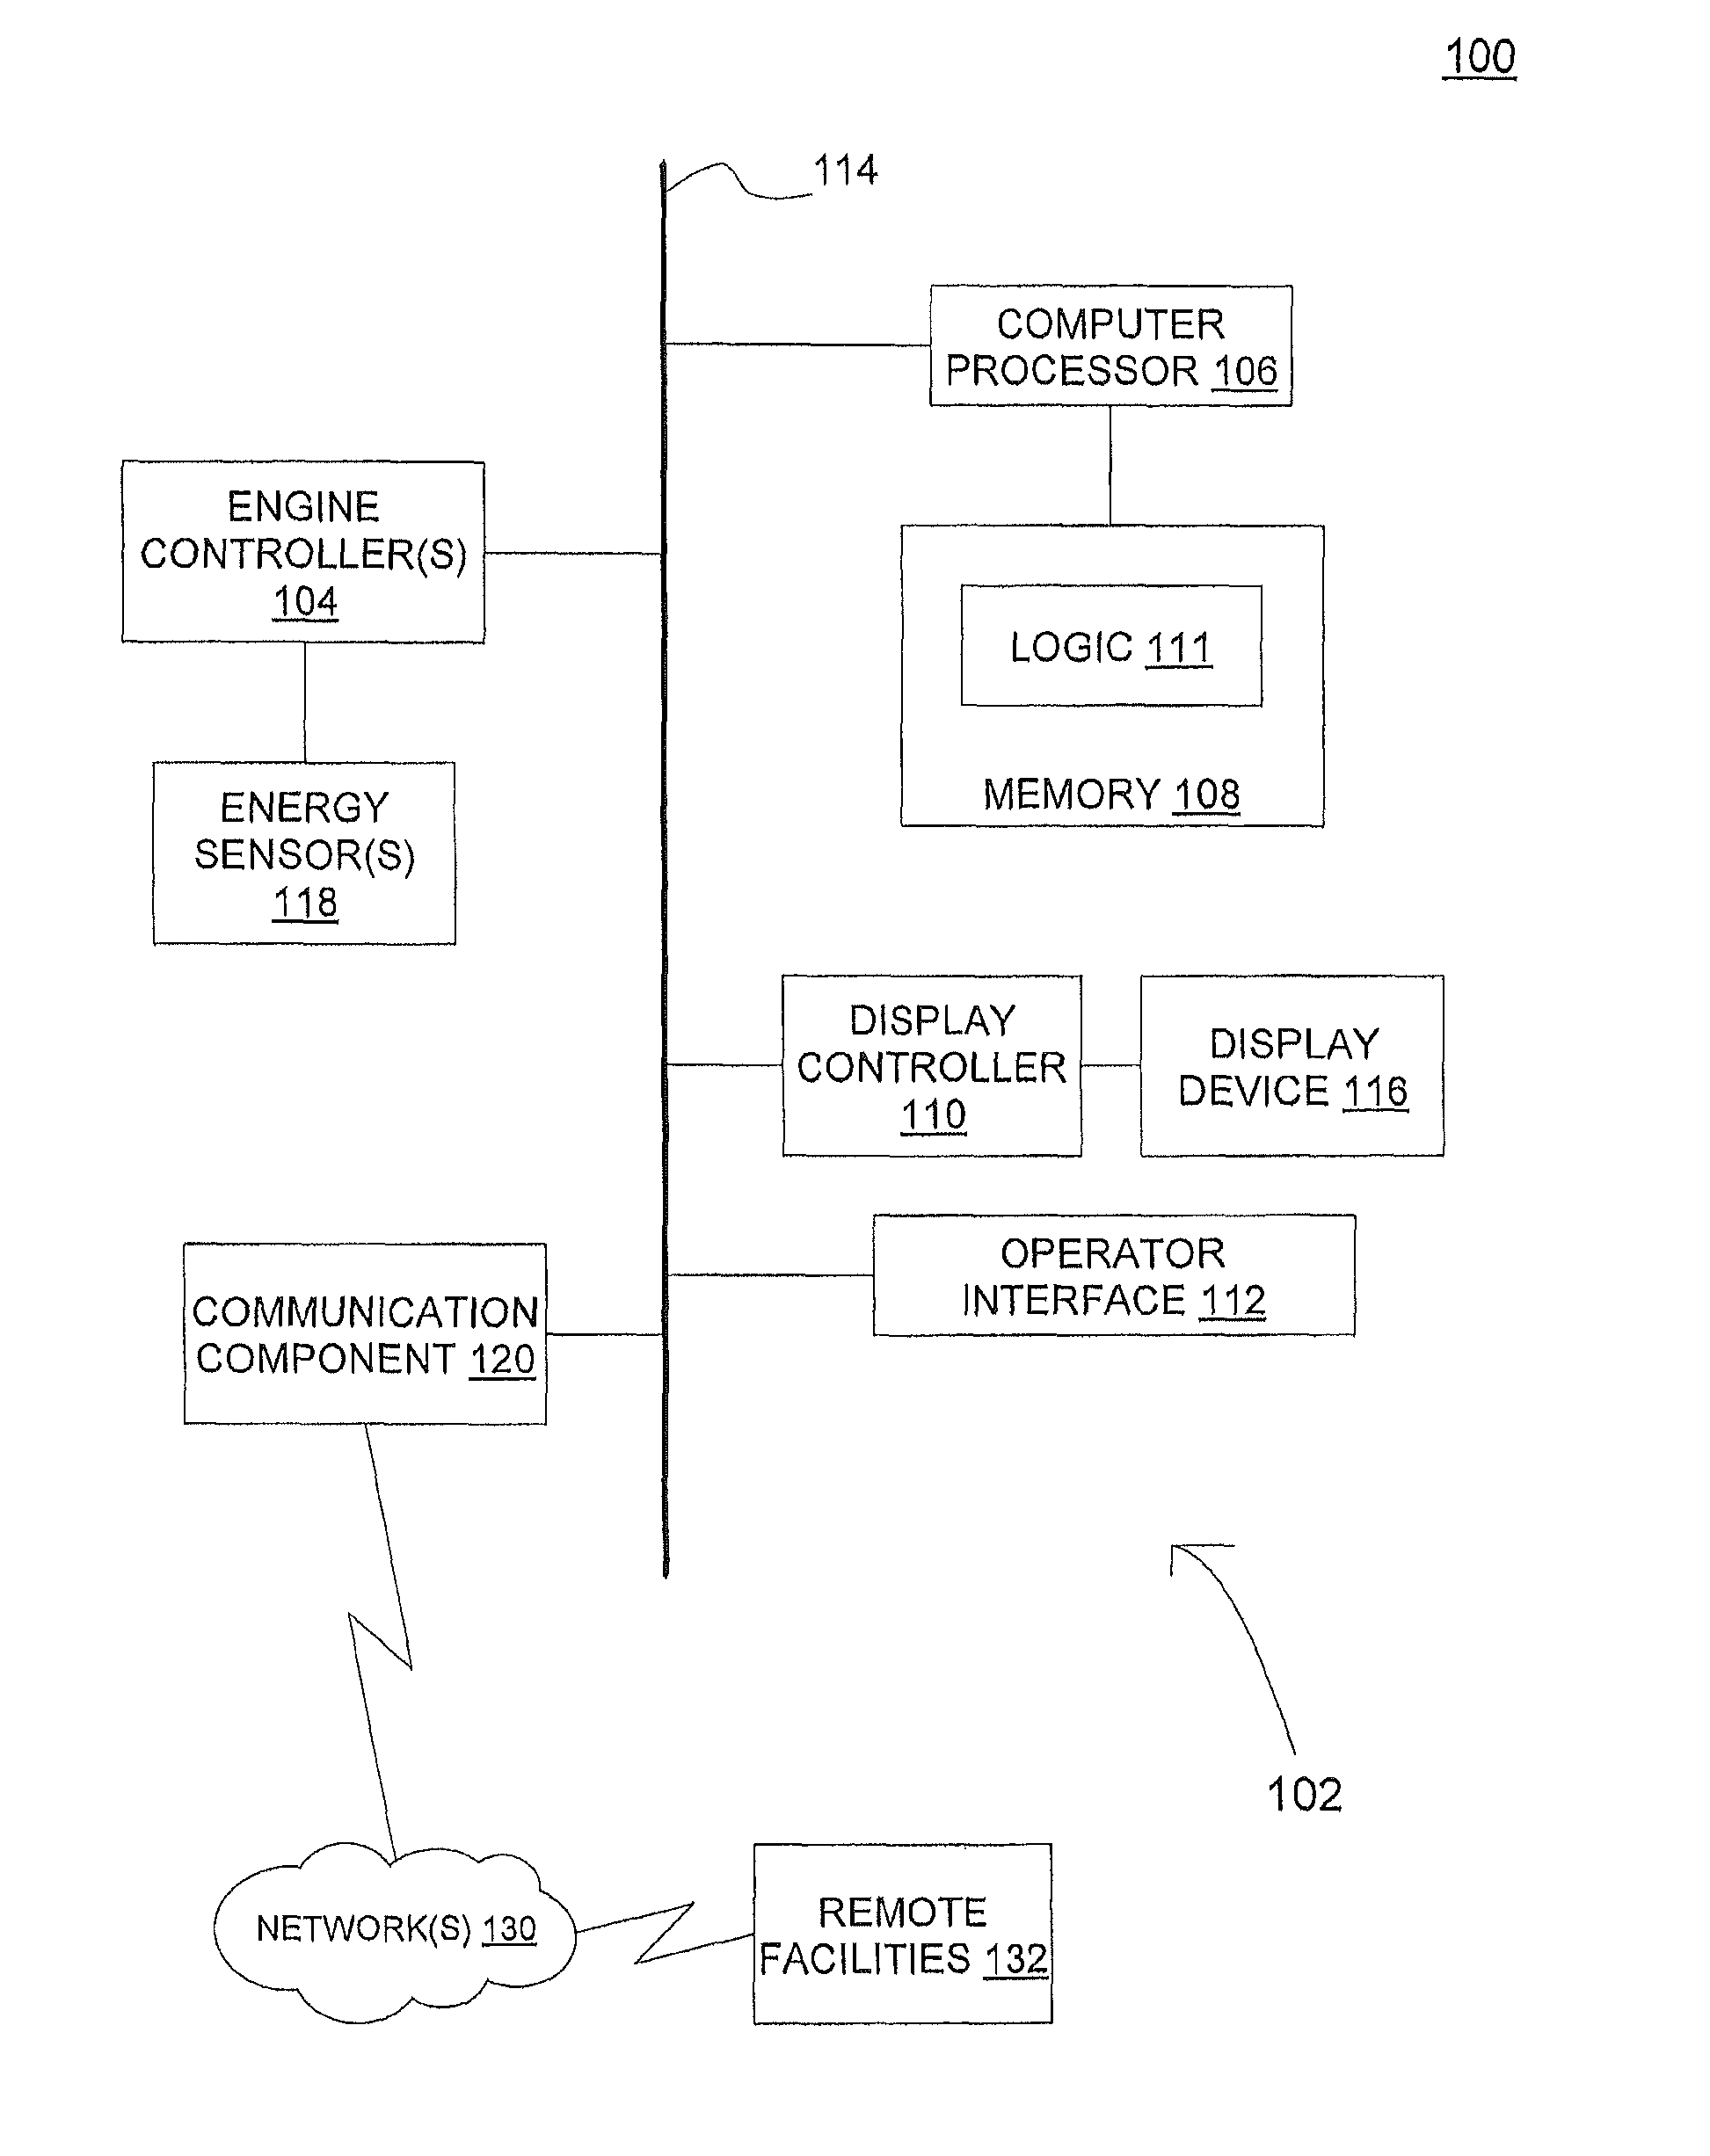 Driver display of energy consumption as a monetary rate